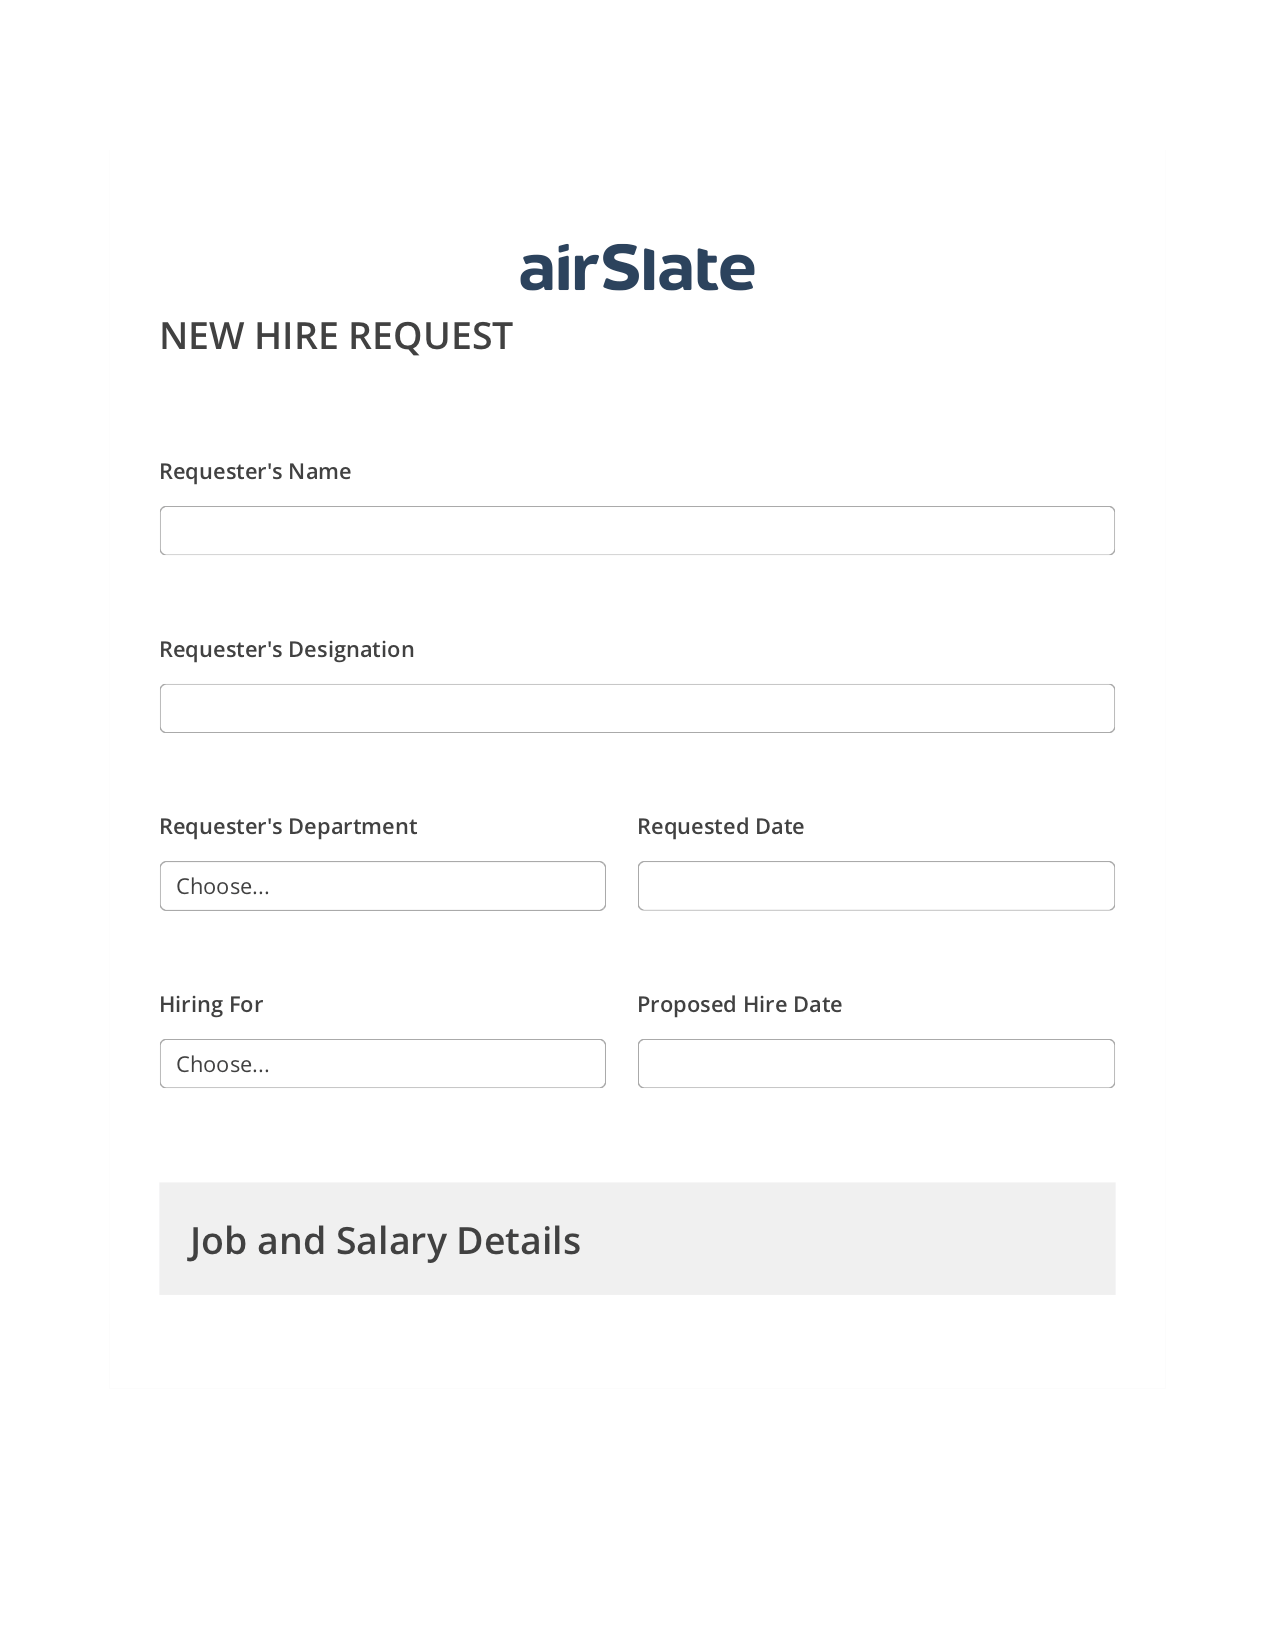 Multirole Hiring Request Workflow Pre-fill from MS Dynamics 365 Records, Remove Tags From Slate Bot, Archive to Box Bot